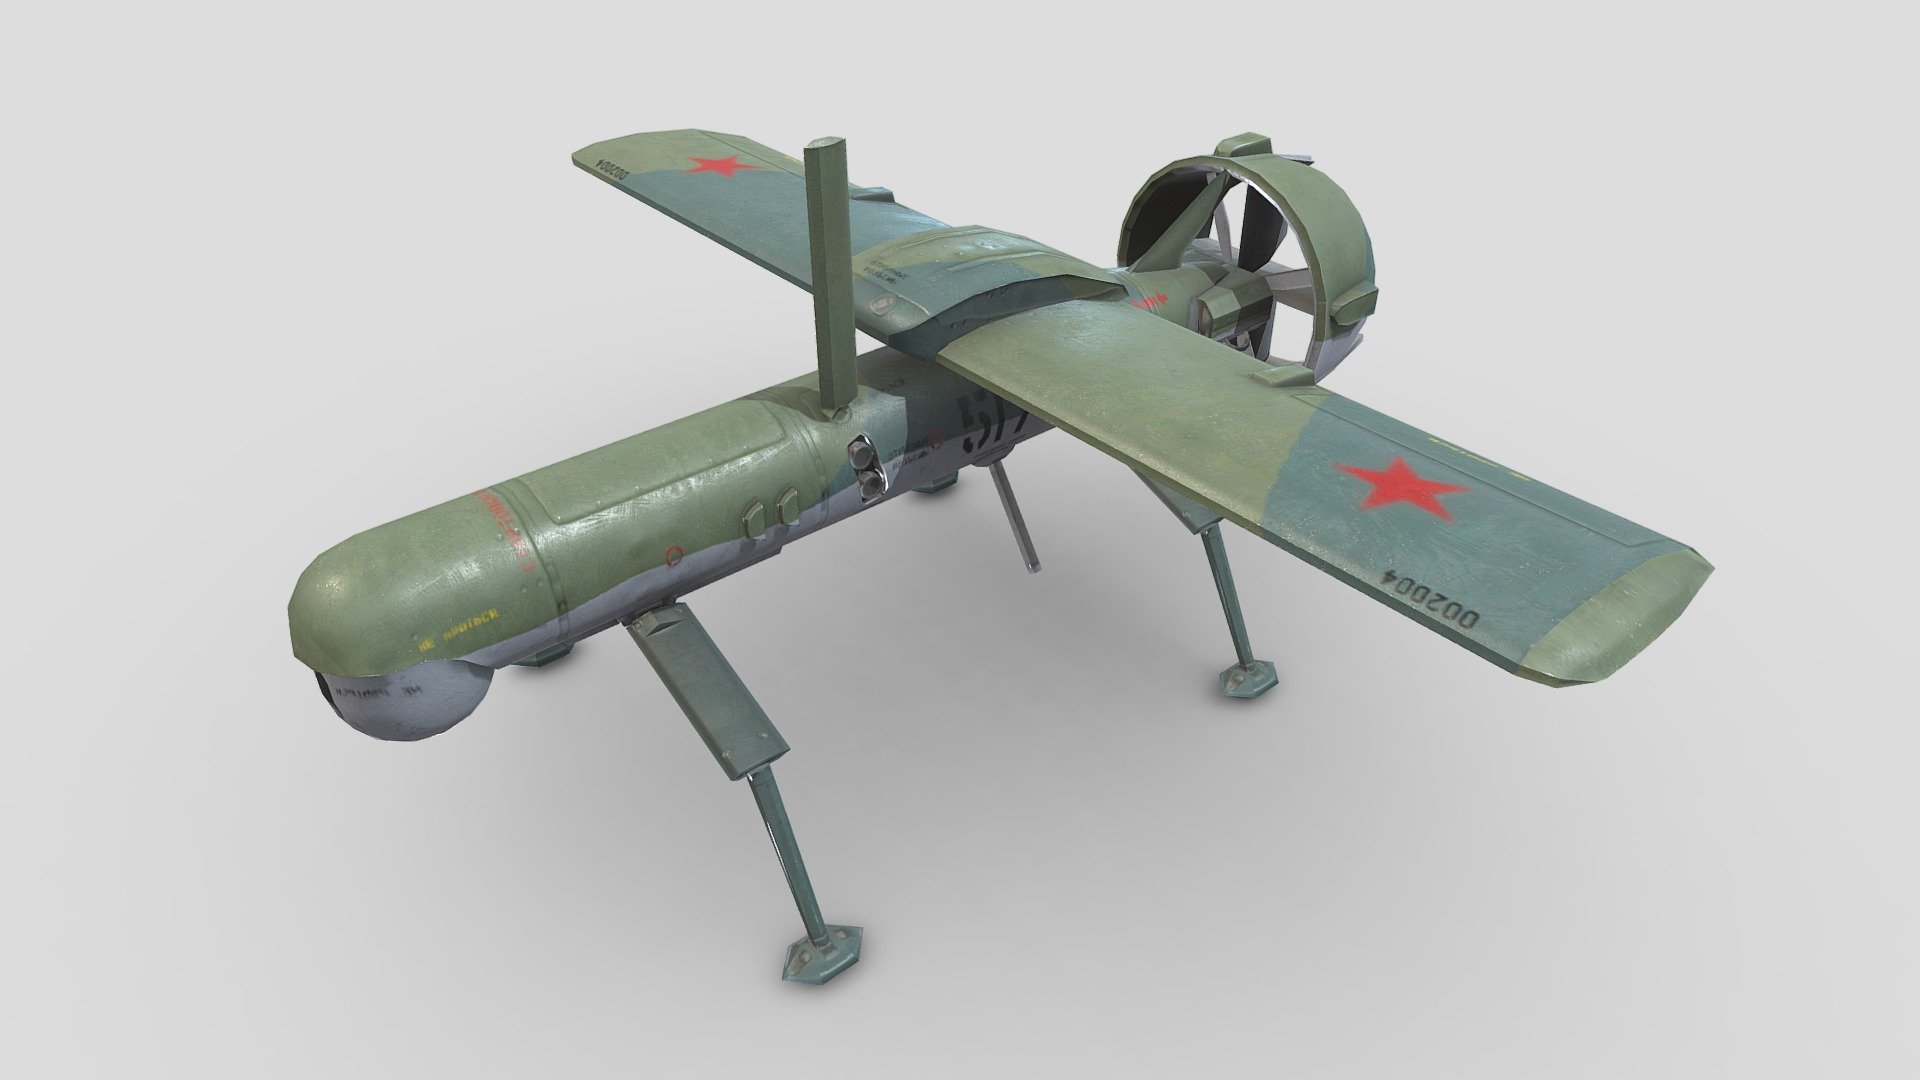 Yakovlev Pchela 1T Drone Russian UAV




-Low-poly Ready to use in Games.

-Textures are in PNG format 2048x2048 PBR metalness 1 set.

-Files unit: Centimeters

-Available formats: MAX 2018 and 2015, OBJ, MTL, FBX, .tbscene.

-If you need any other file format you can always request it.

-All formats include materials and textures.

The Yakovlev Pchela-1T is an unmanned aerial vehicle (UAV) manufactured by the Russian Yakovlev Design Bureau. Its primary use is for surveillance and observation in battlefield environments with downlinked video. Other implementations and uses include target designation and as a training target 3d model